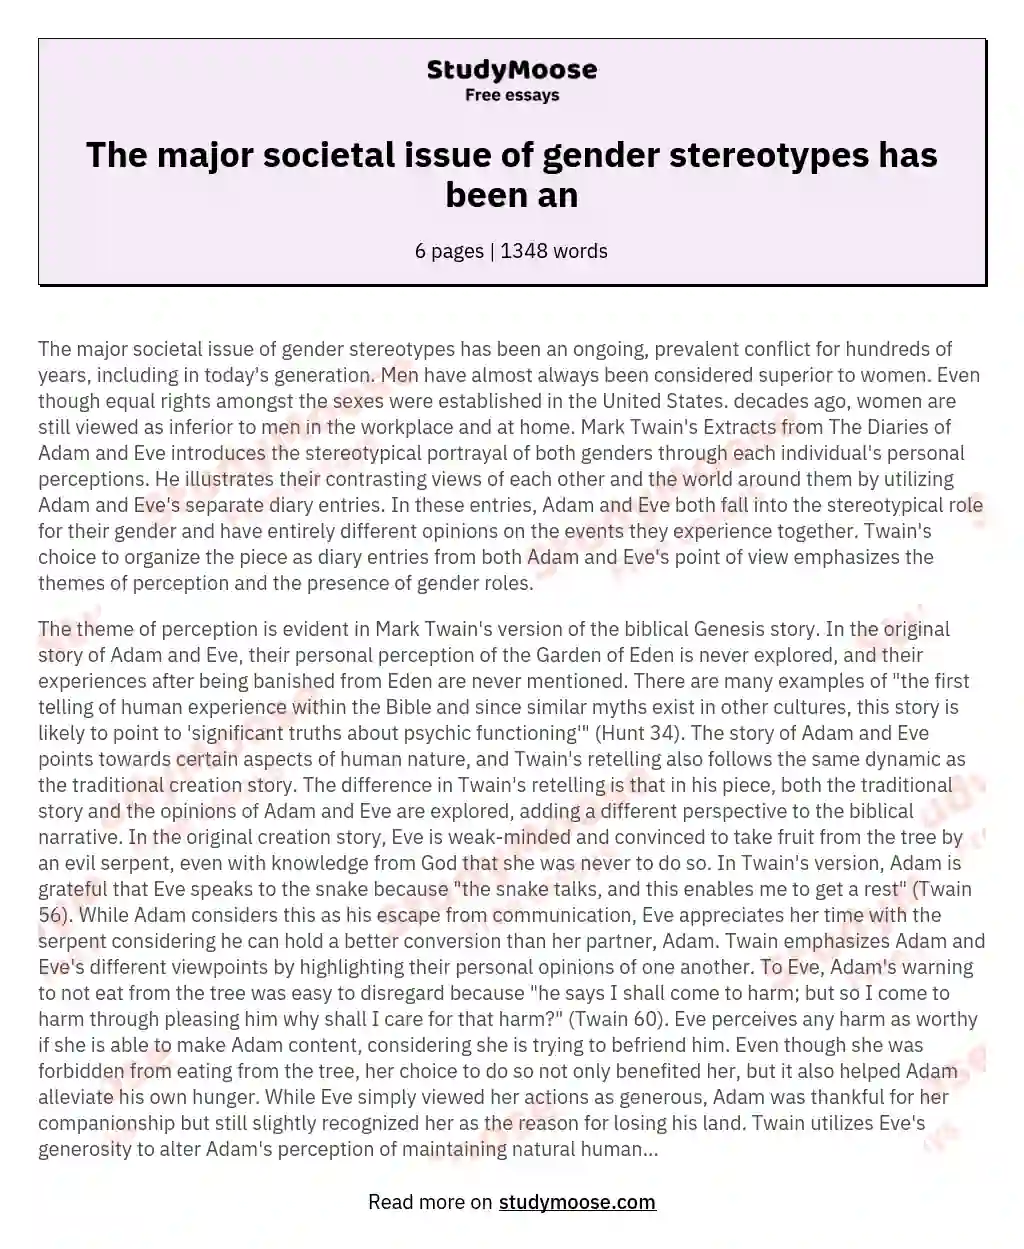 The major societal issue of gender stereotypes has been an